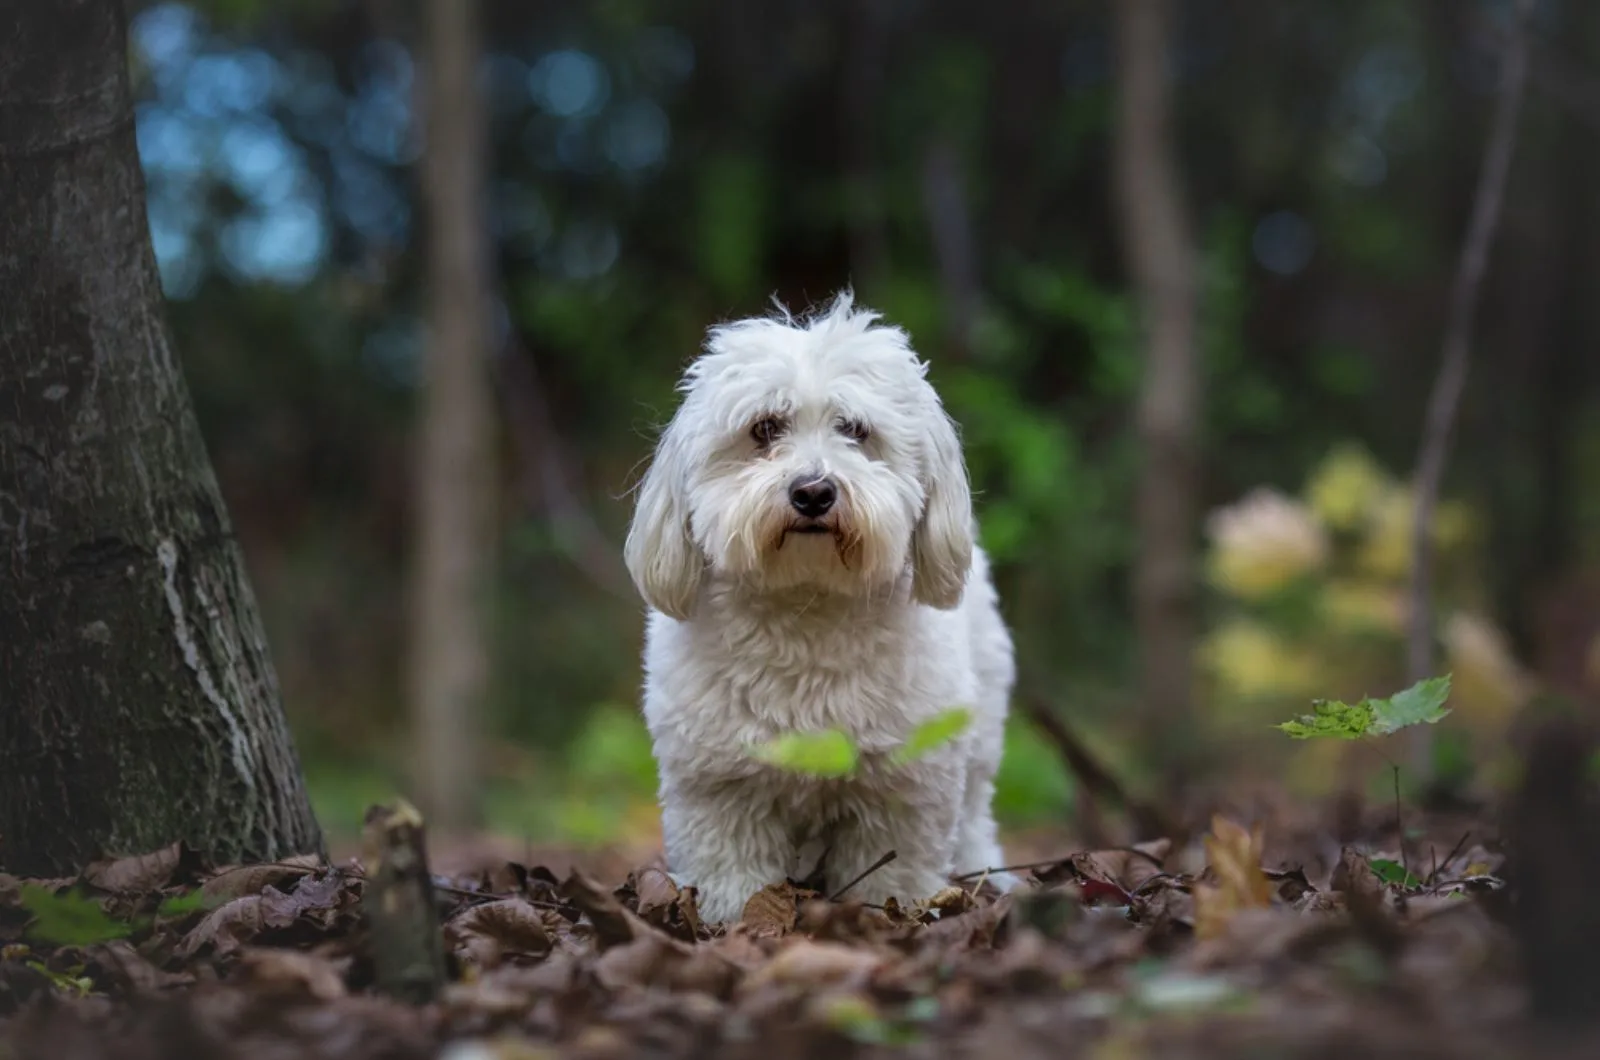 coton de tulear standing in the forest near the tree